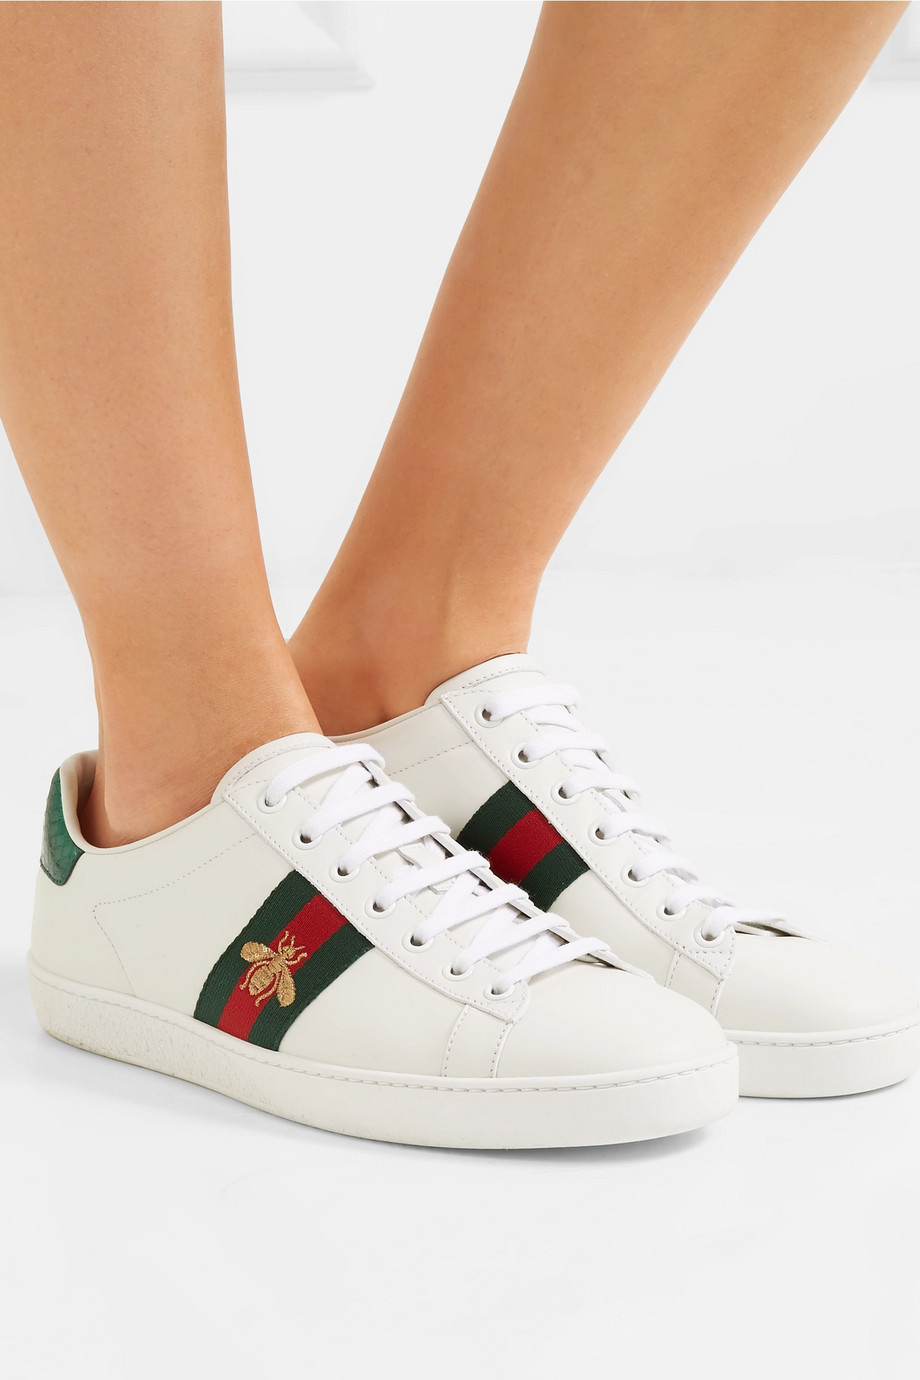 gucci ace bee sneakers